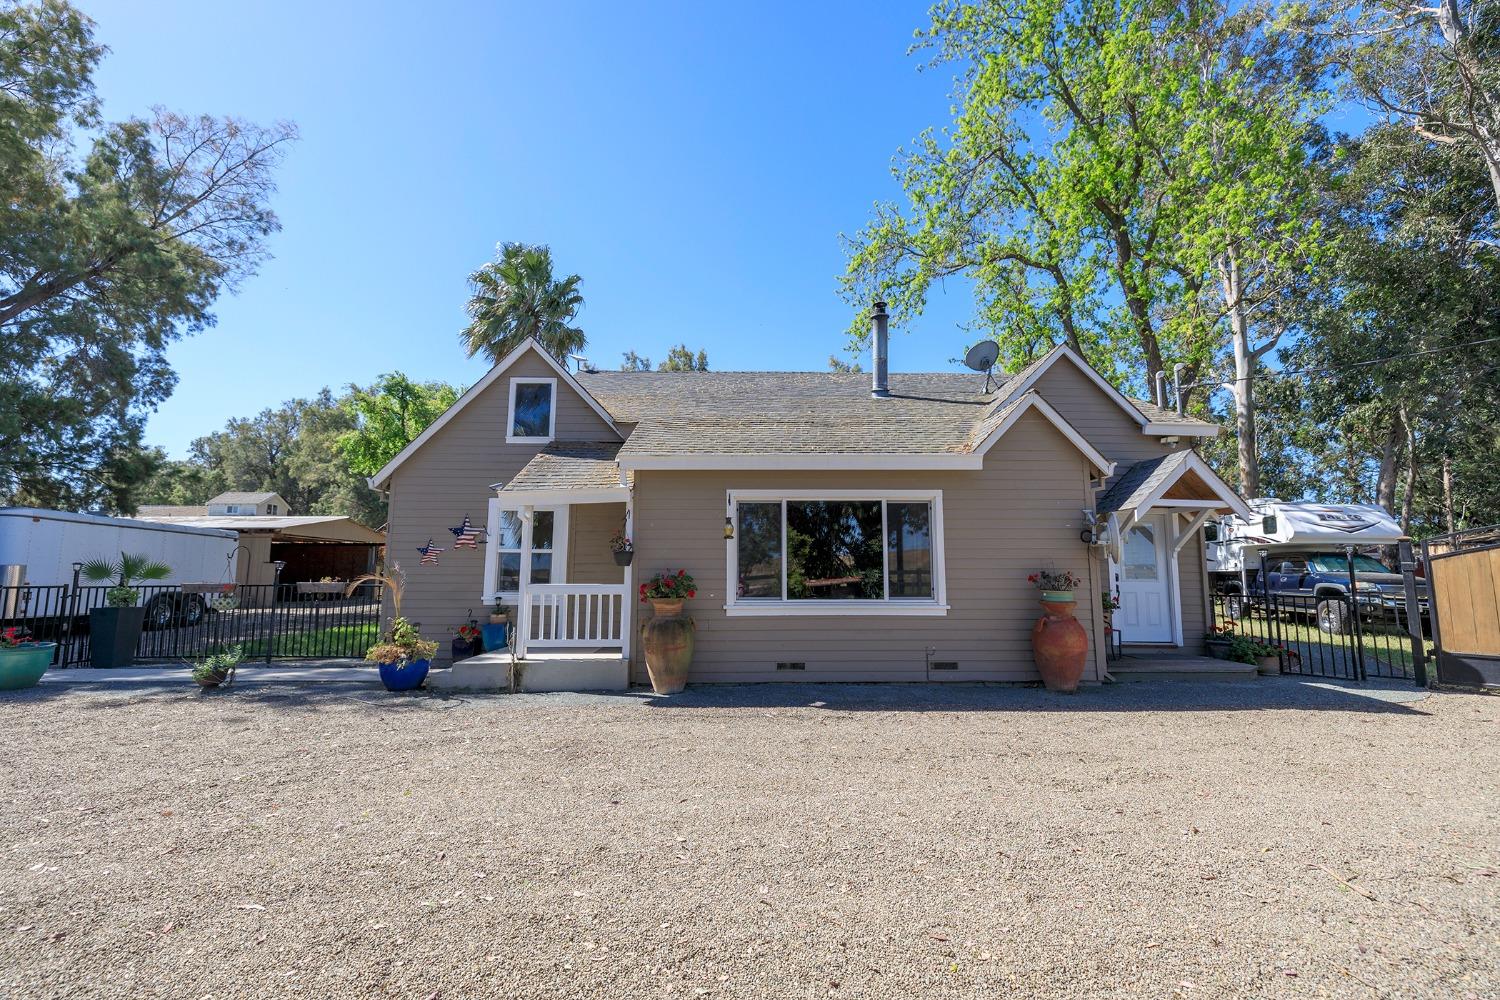 Photo of 15685 Kelso Rd in Livermore, CA